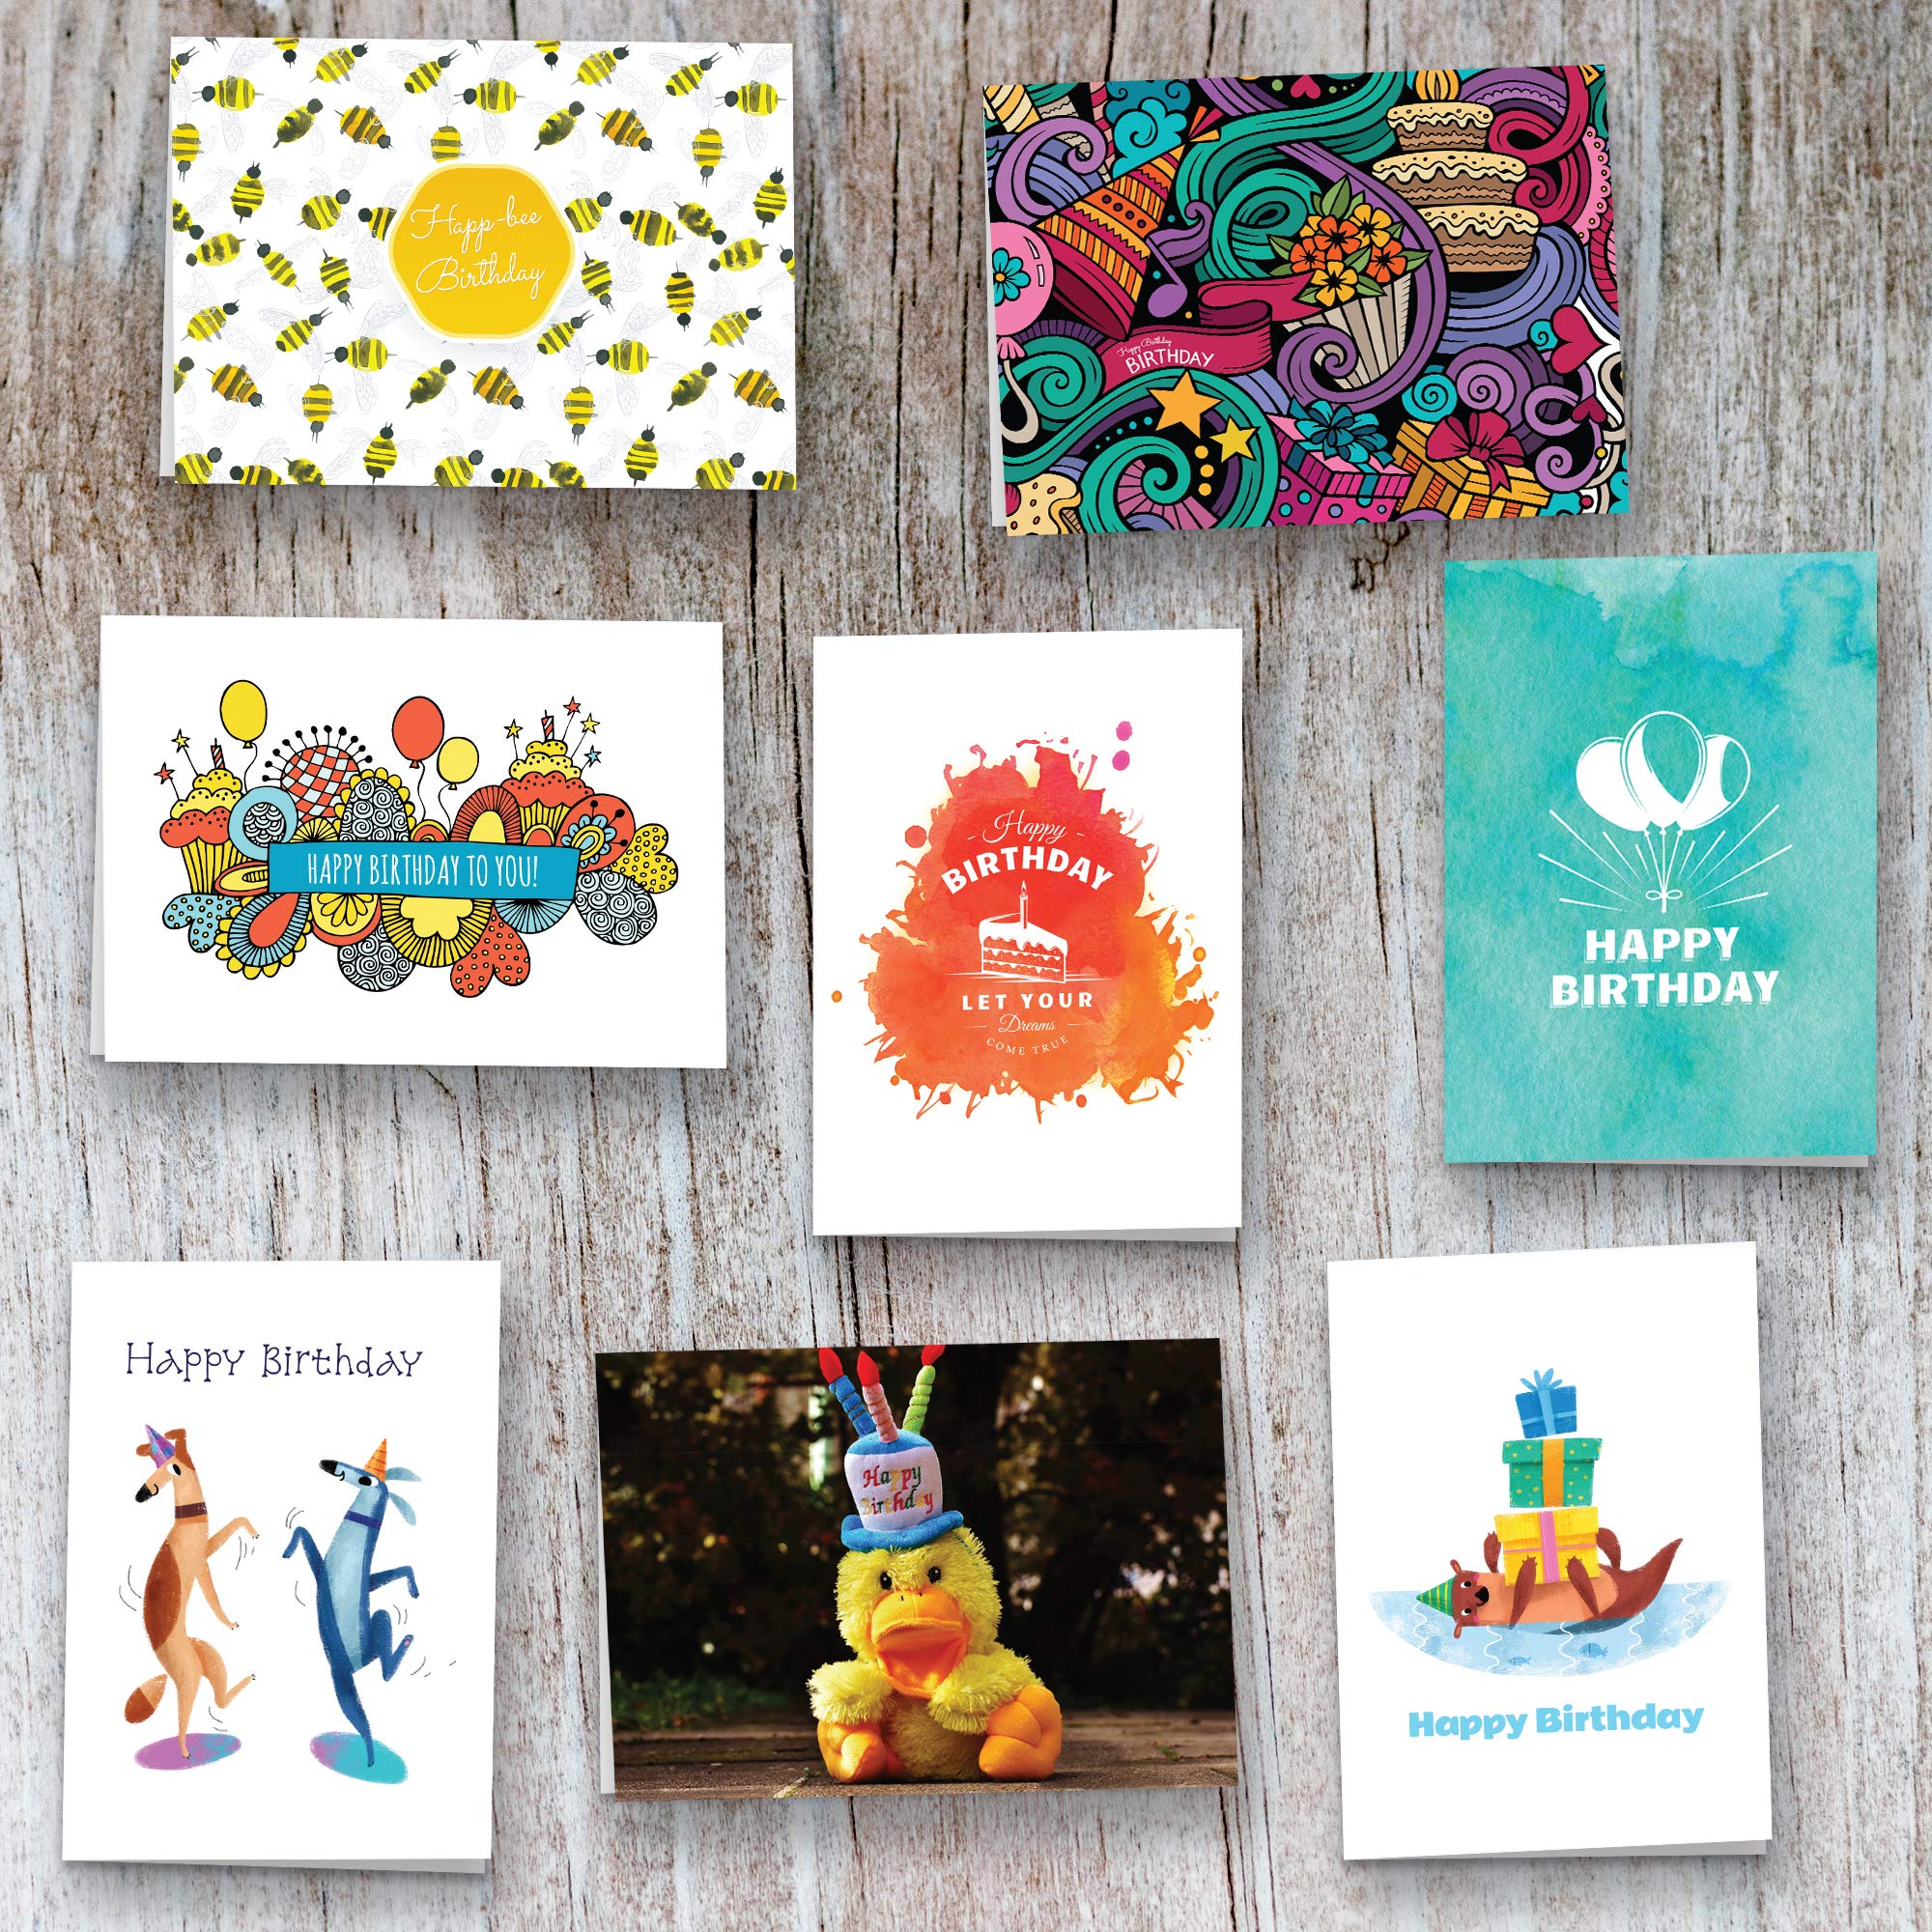 40 Happy Birthday Cards Assortment with Envelopes - Perfect Assorted Birthday Party Greetings Card for Men Women Kids Parent and Employees - Blank Inside With Original Humoristic Colorful Art Designs Outside - Quality Thick Cards